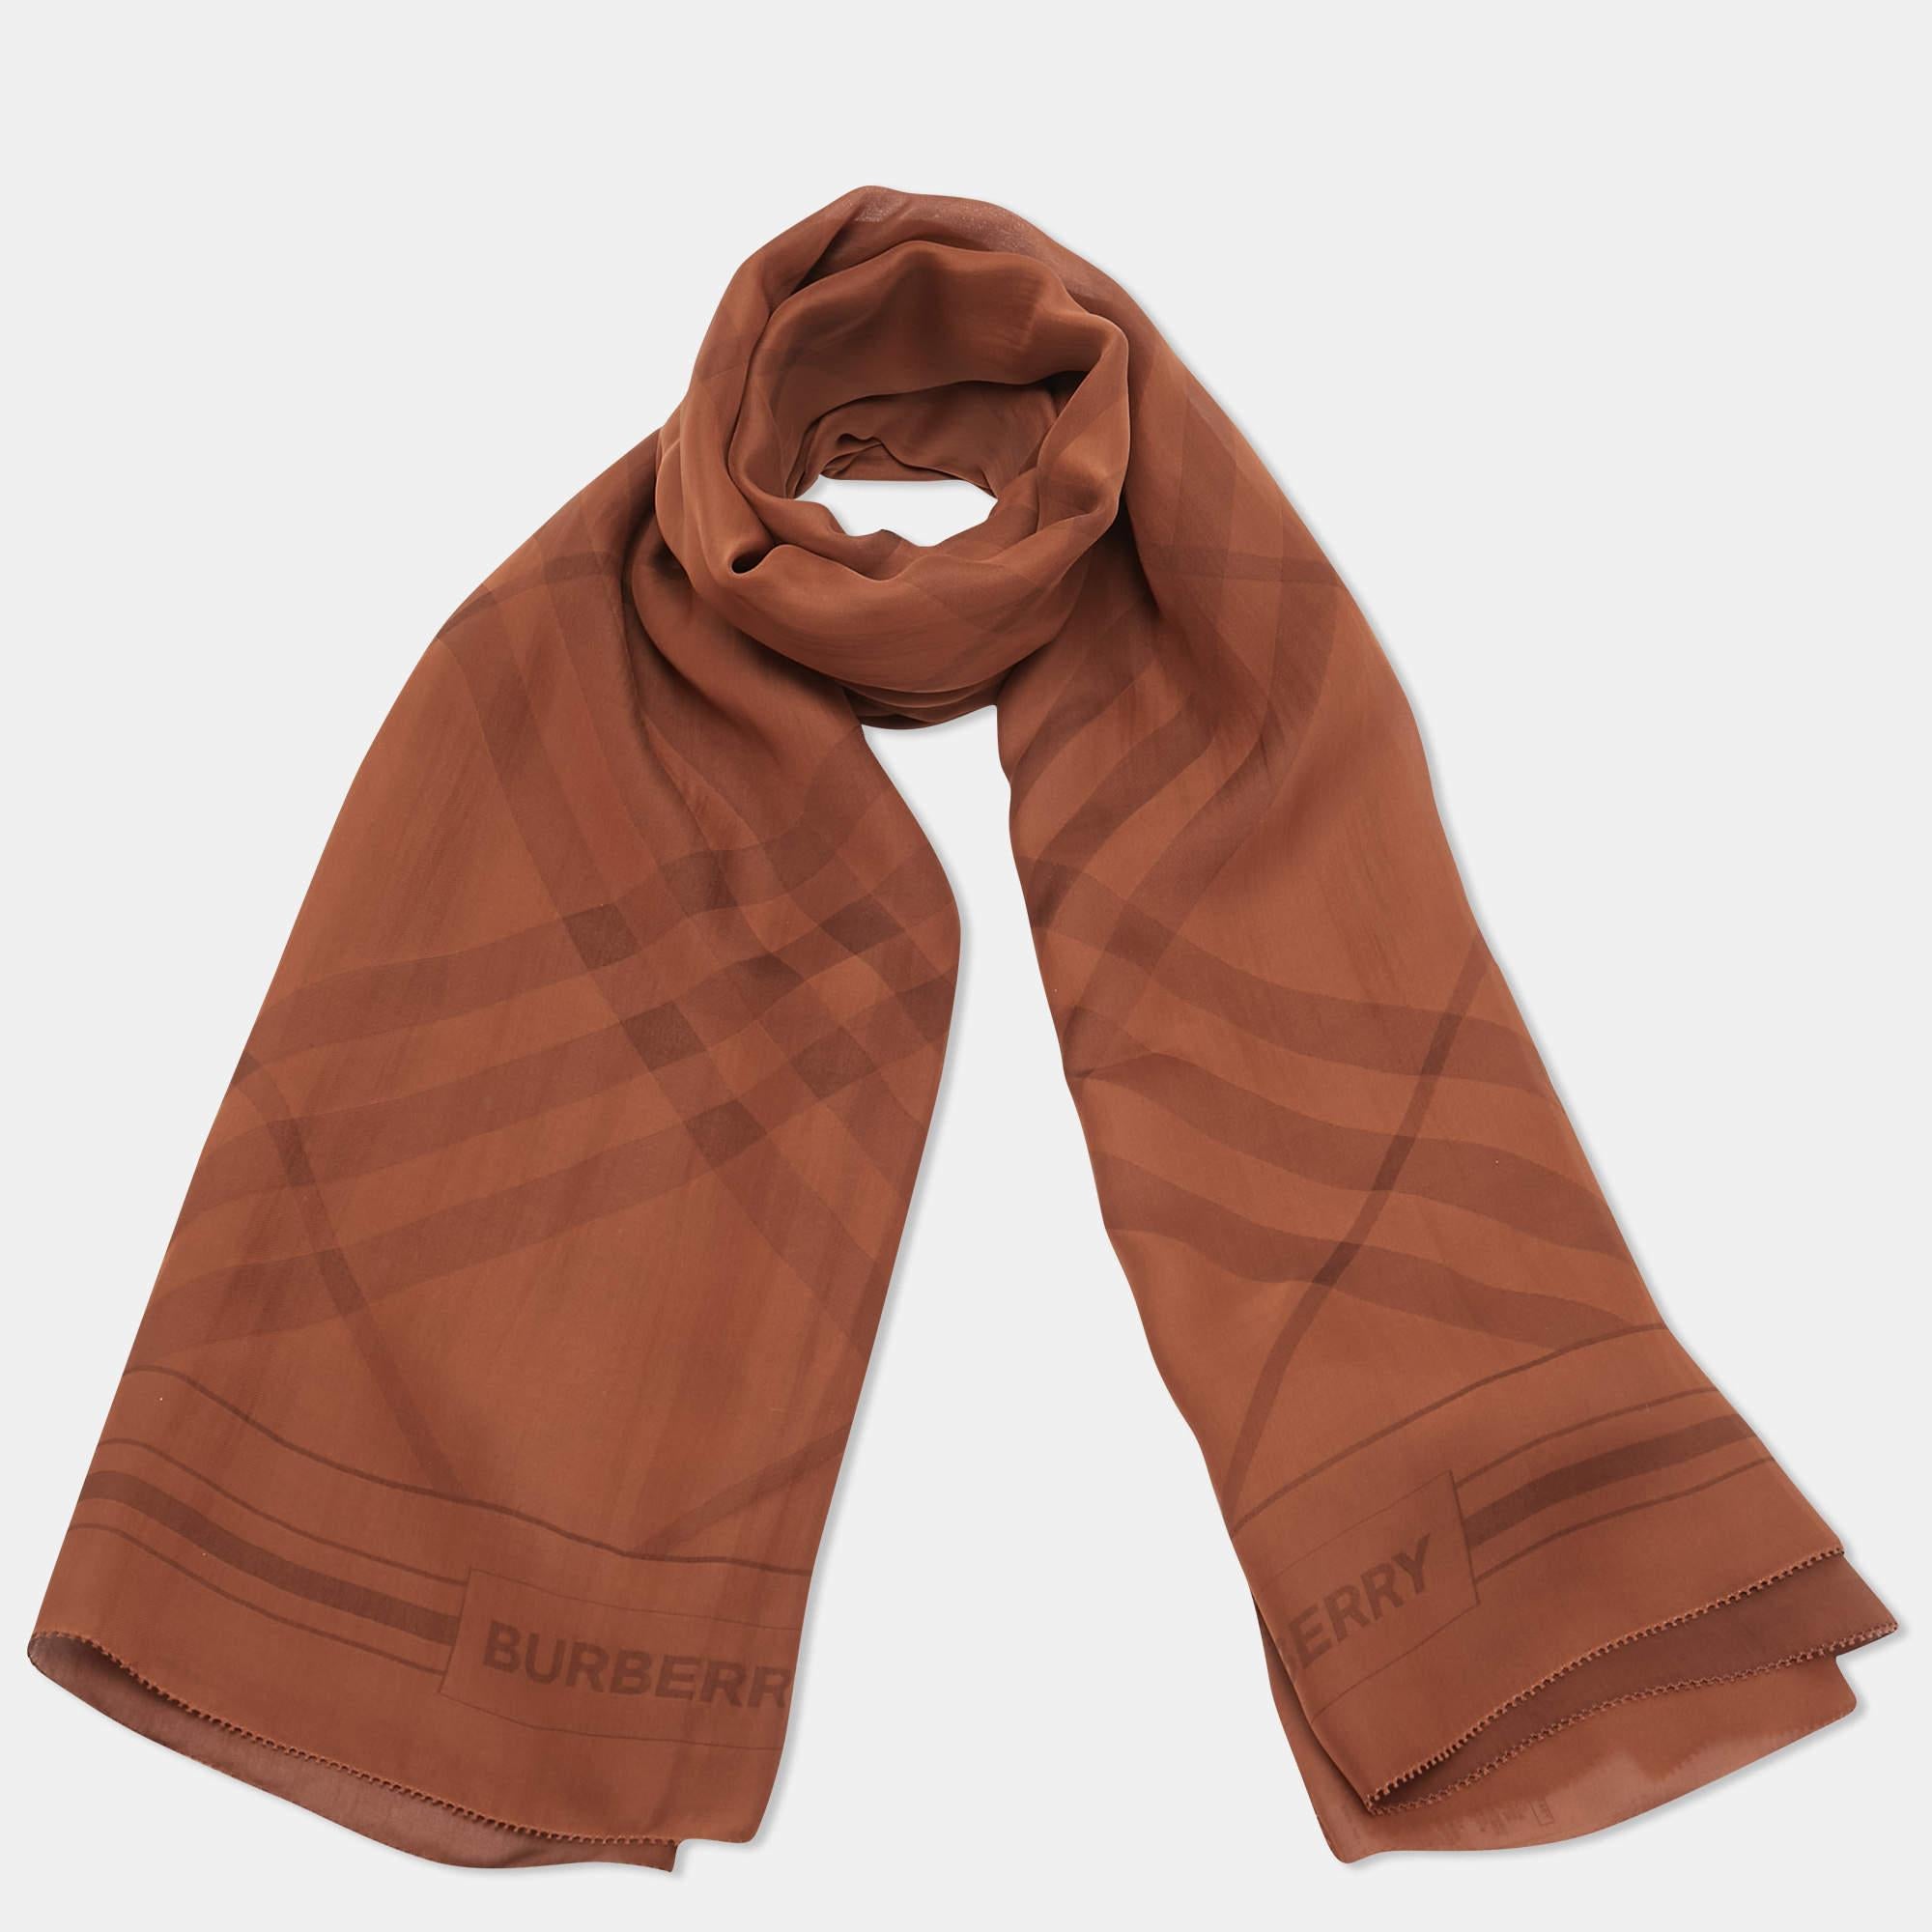 This lovely scarf is a fun way to accessorize your casual outfits and statement totes. This scarf from Burberry features an interesting design. It is cut from smooth fabric and will elevate all your looks.

Includes: Brand Tag